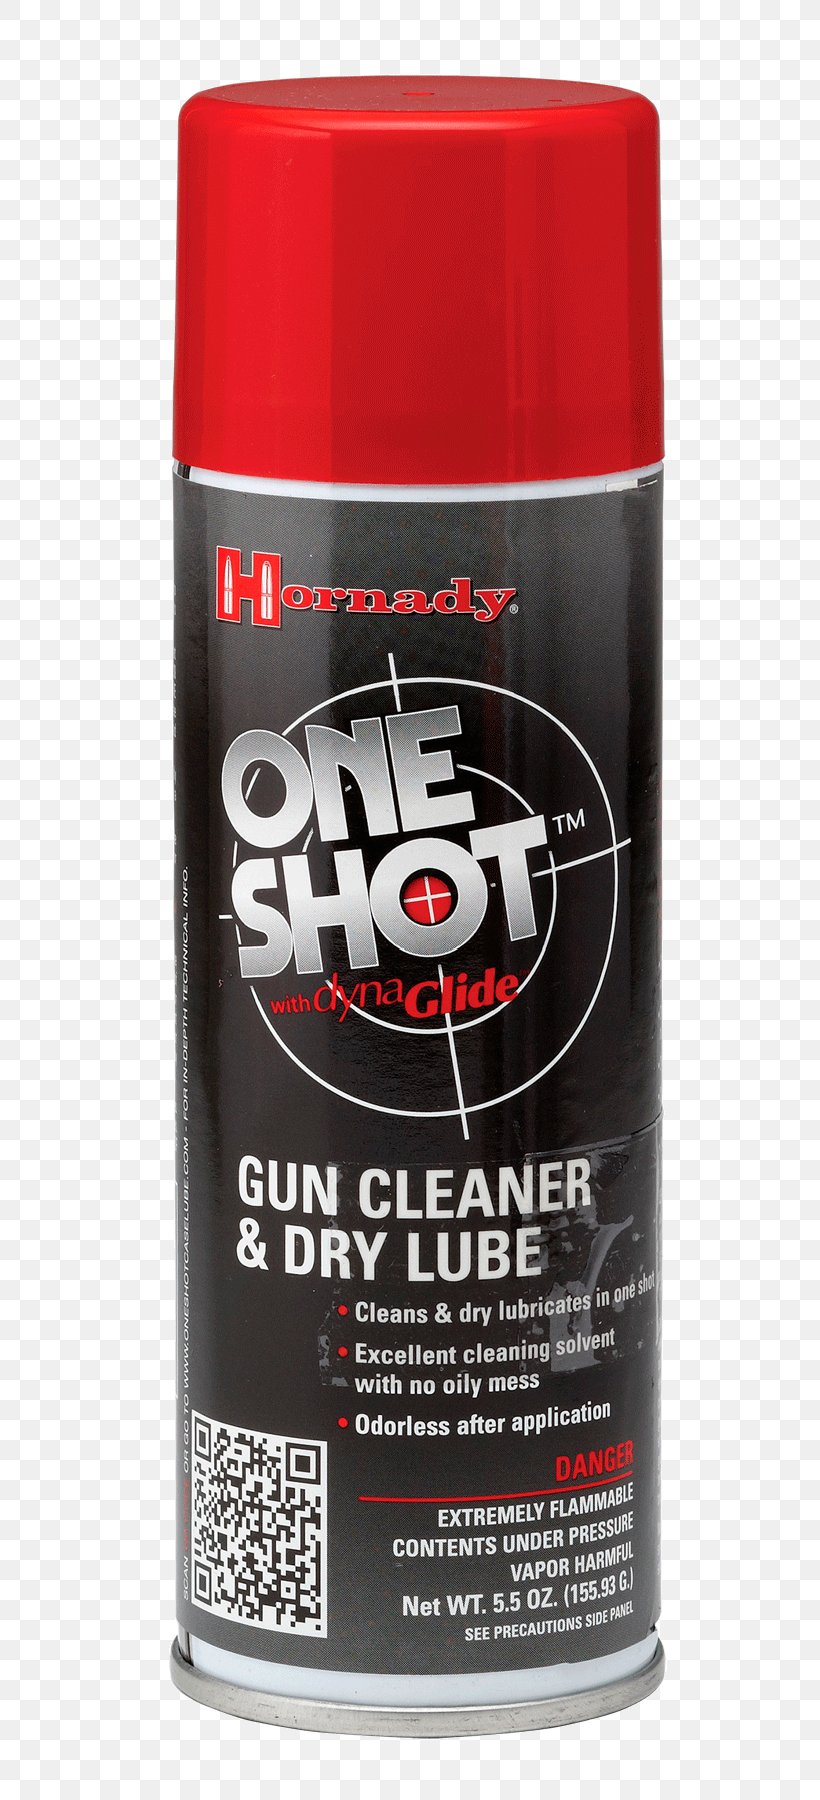 Personal Lubricants & Creams Cleaning Hornady Shotgun, PNG, 665x1800px, Lubricant, Cleaning, Gun, Hornady, Liquid Download Free